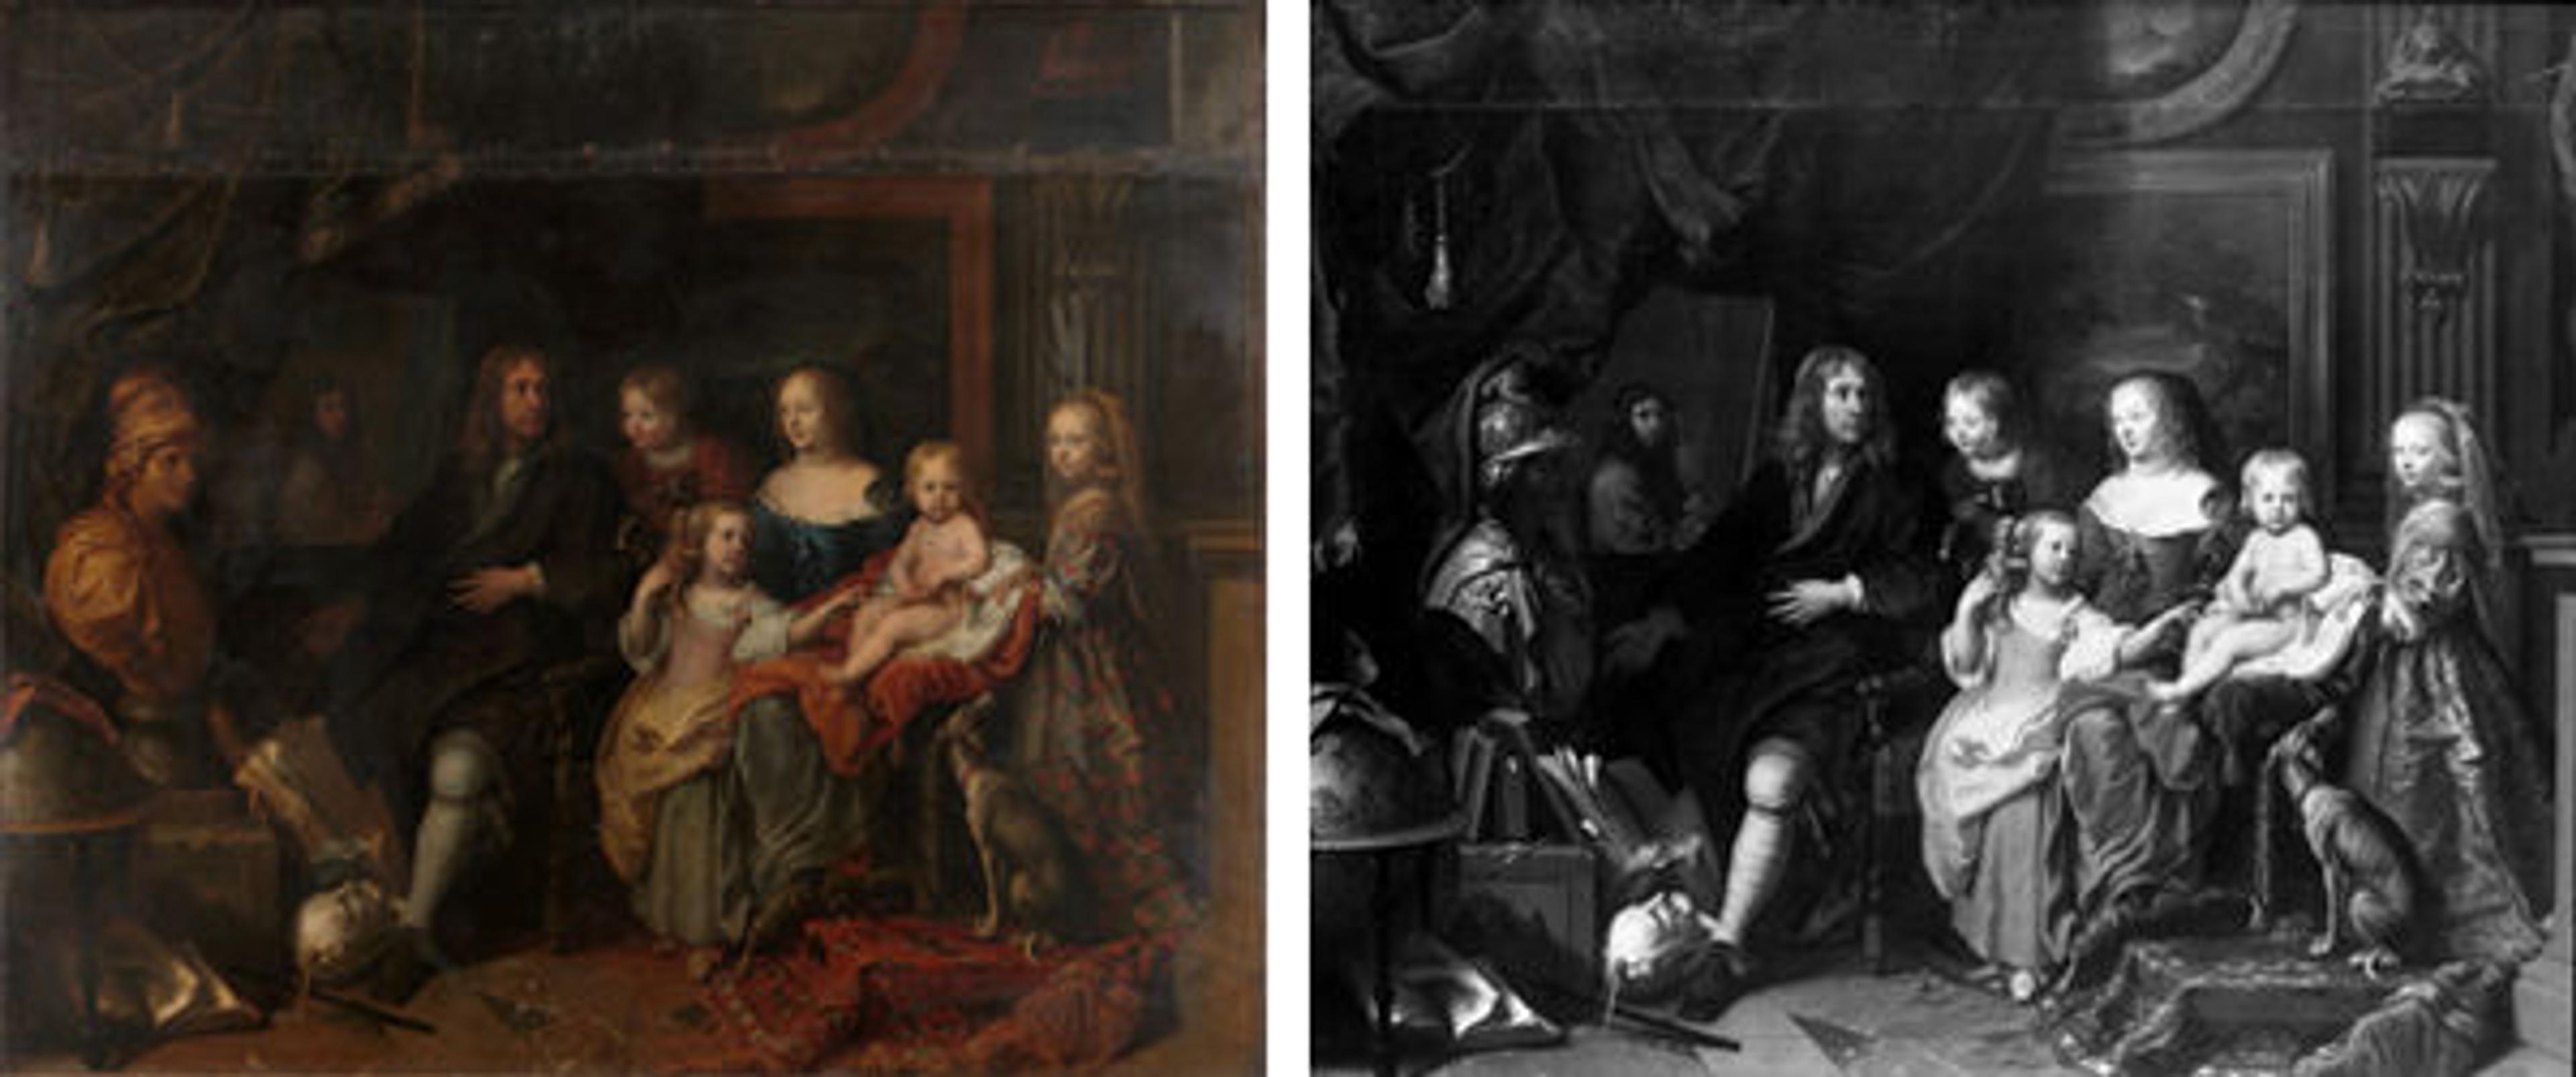 Left: The Met's work. Right: The Berlin picture